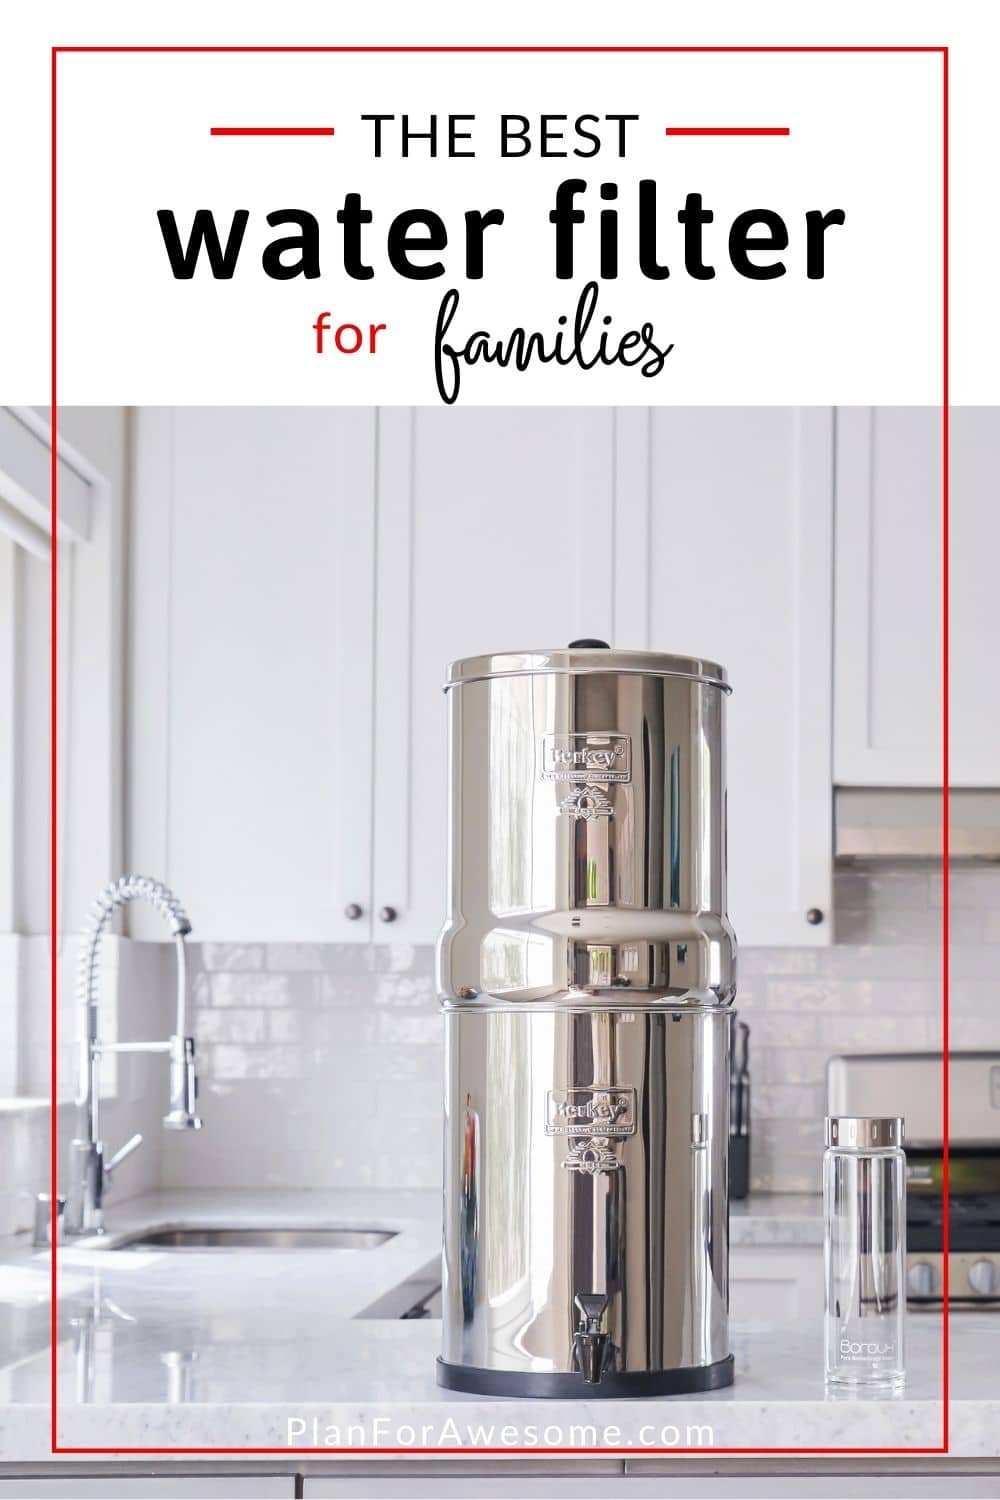 Why a Berkey Water Filter is the best available option